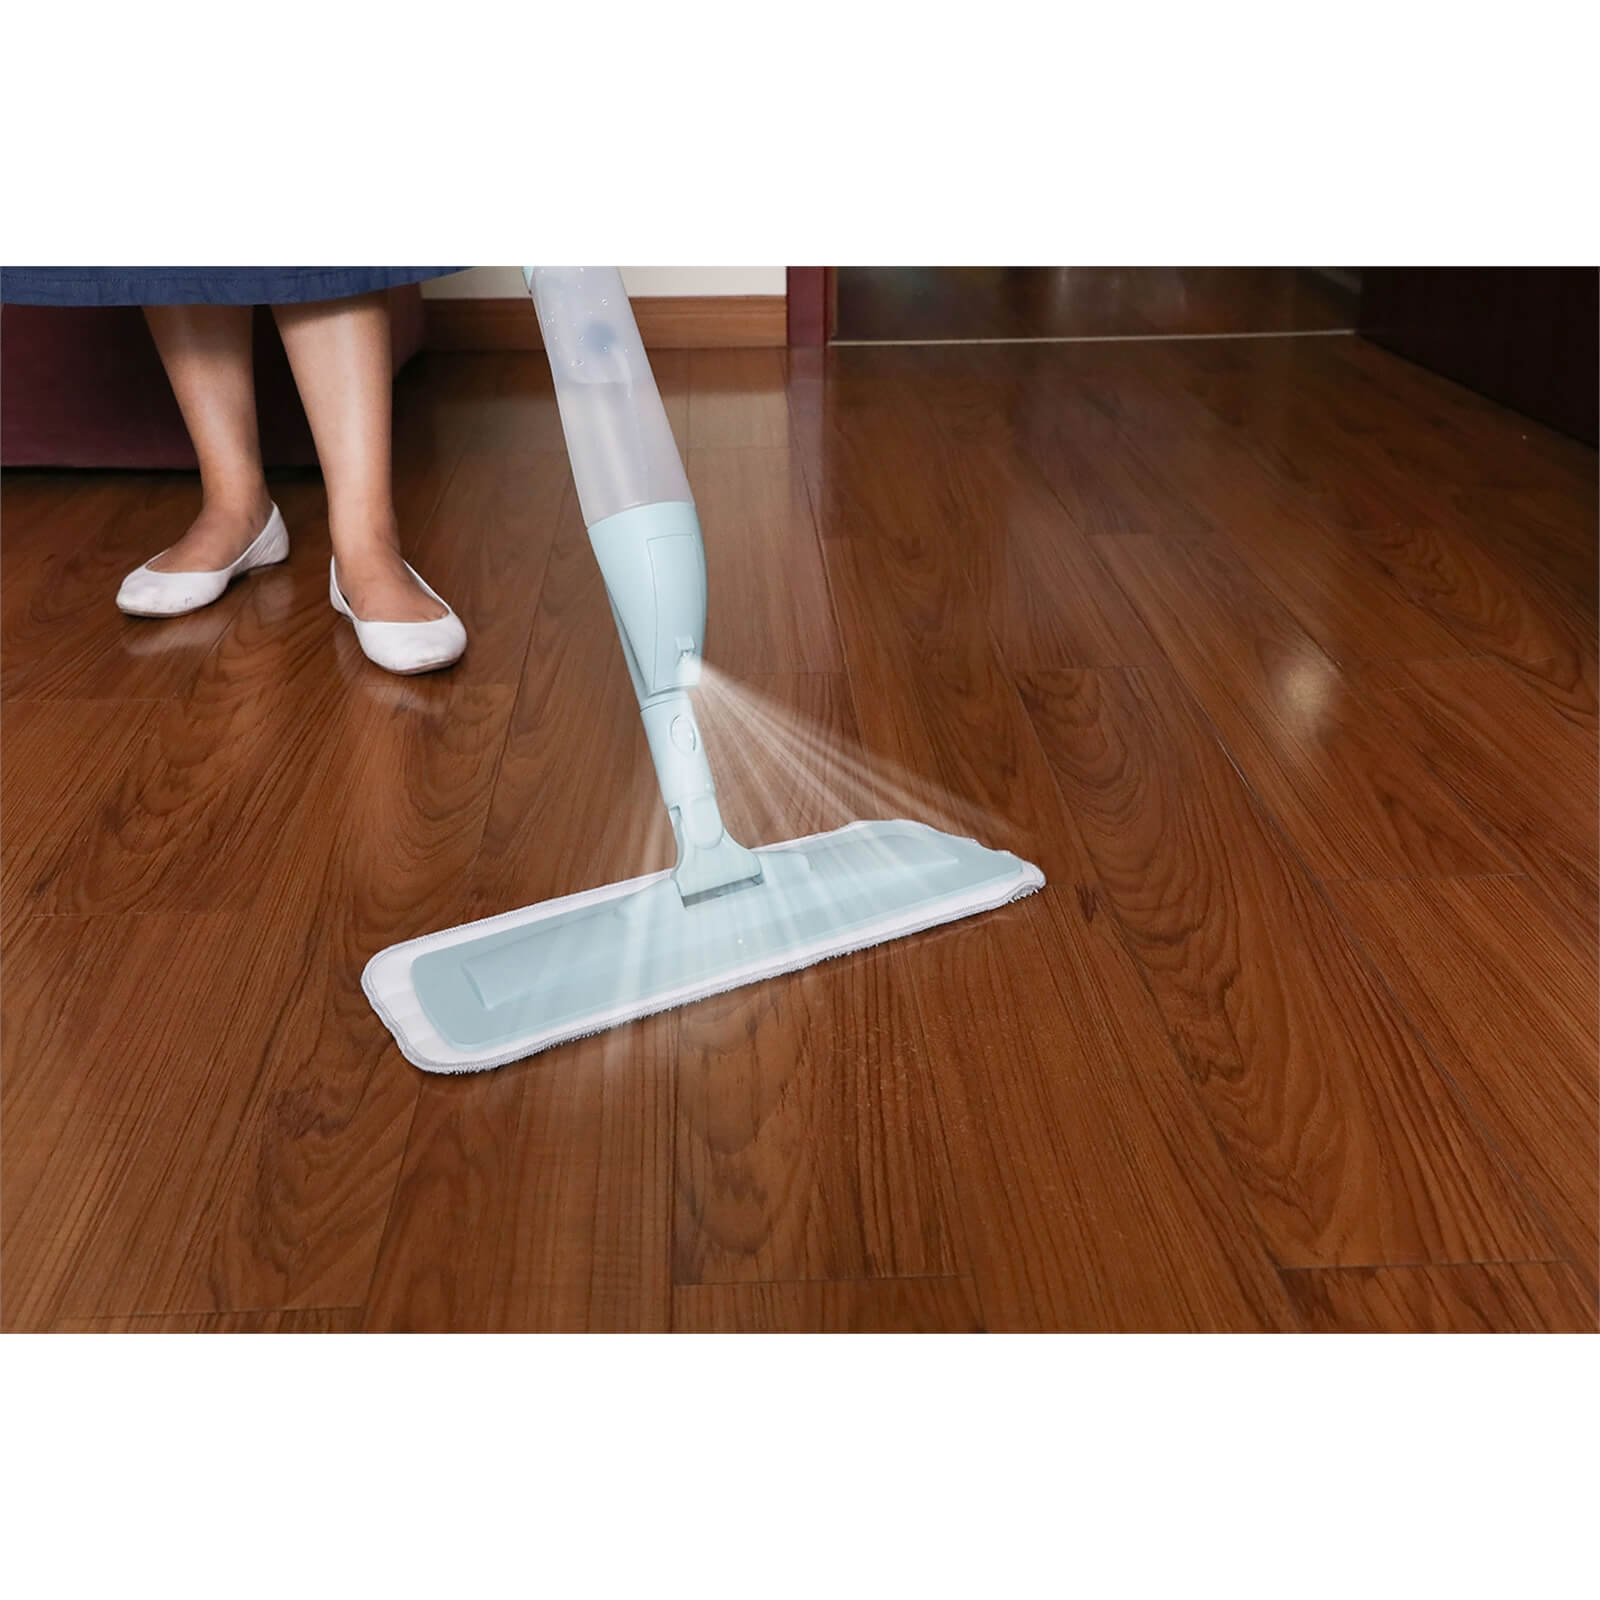 Mop with Spray Applicator